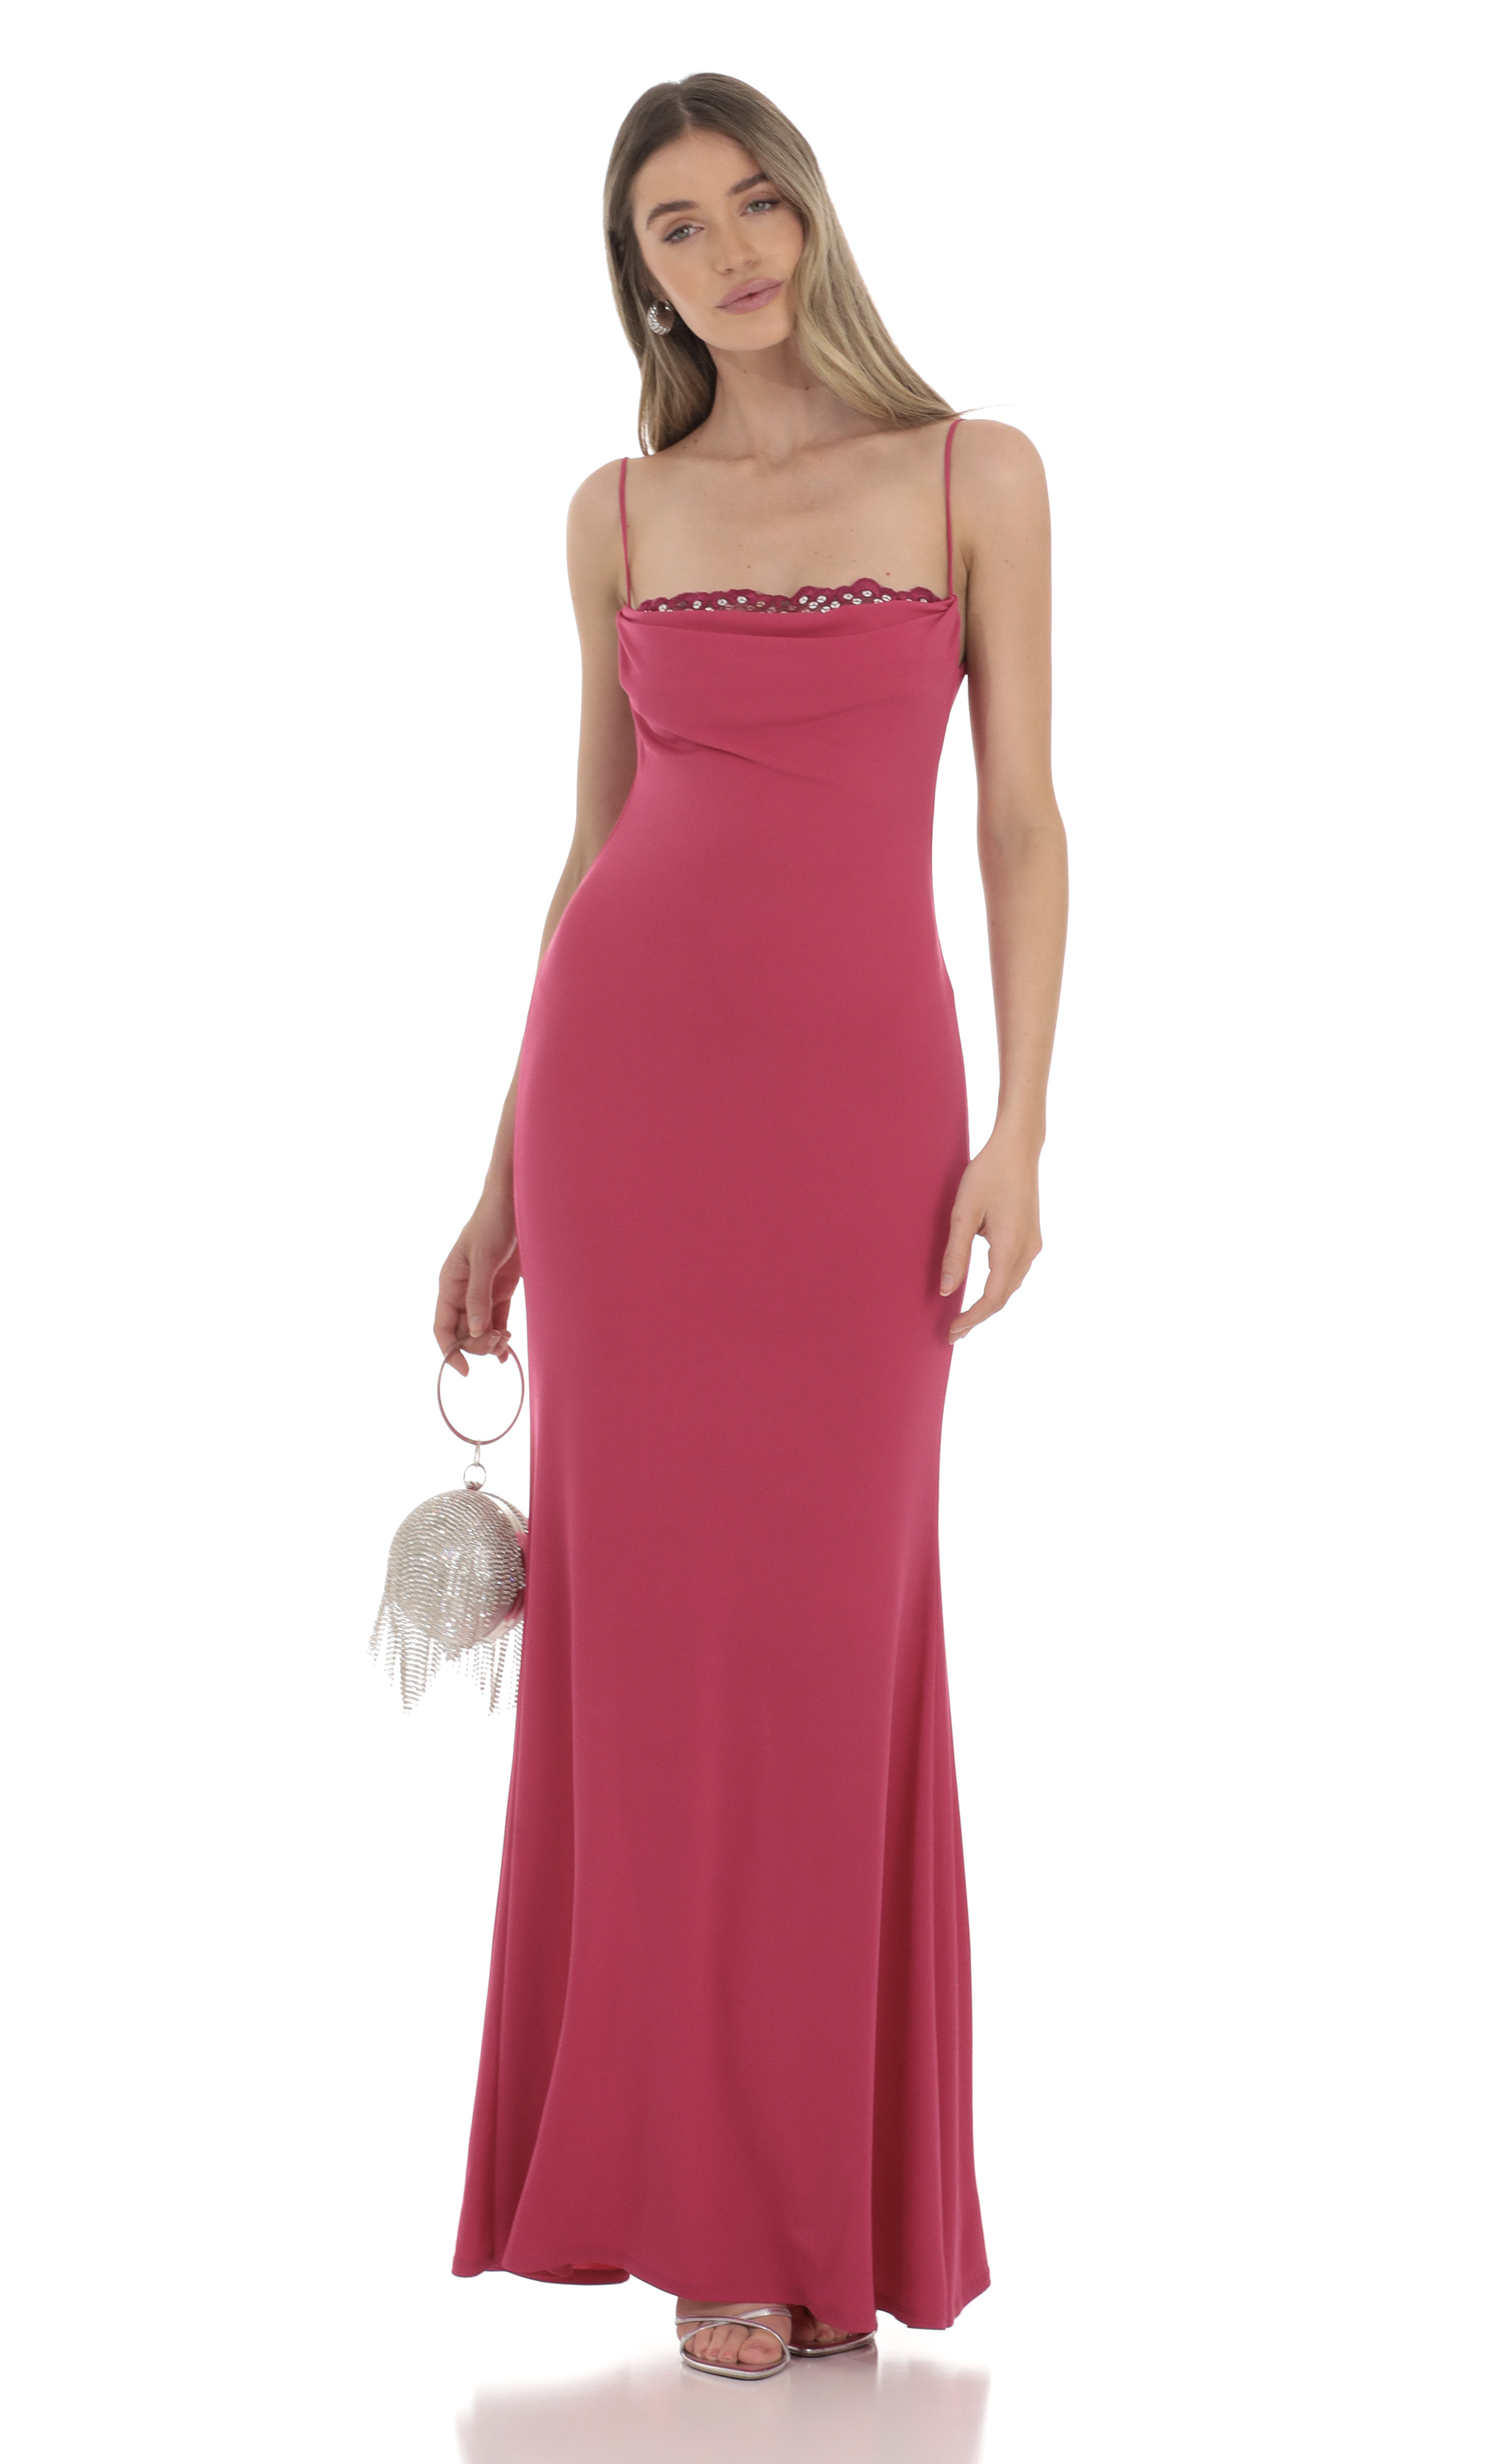 Lace Cowl Neck Maxi Dress in Magenta